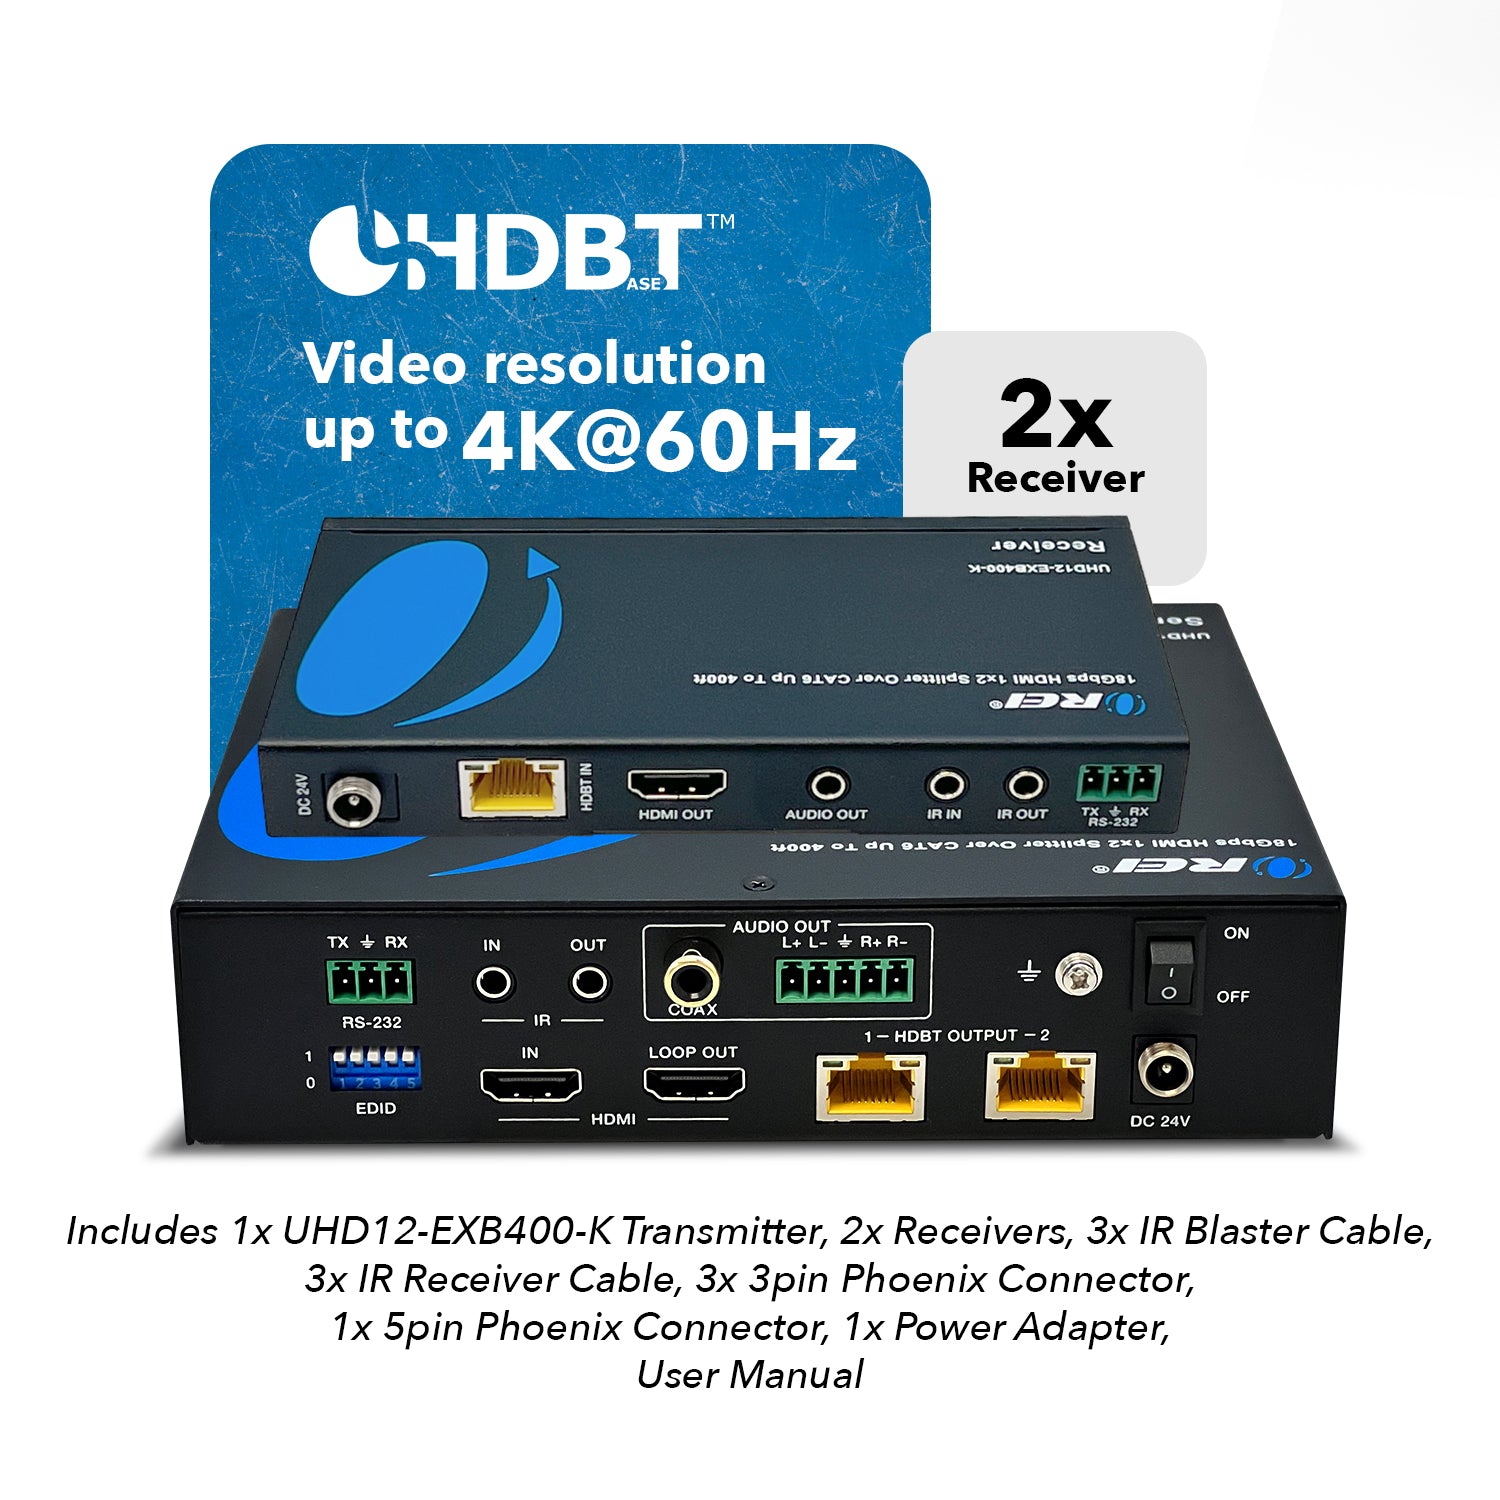 HDMI Plus Extender/Splitter over Cat.6 Cable 1080p@60Hz up to 120m - Audio  Video Extender - Audio Video